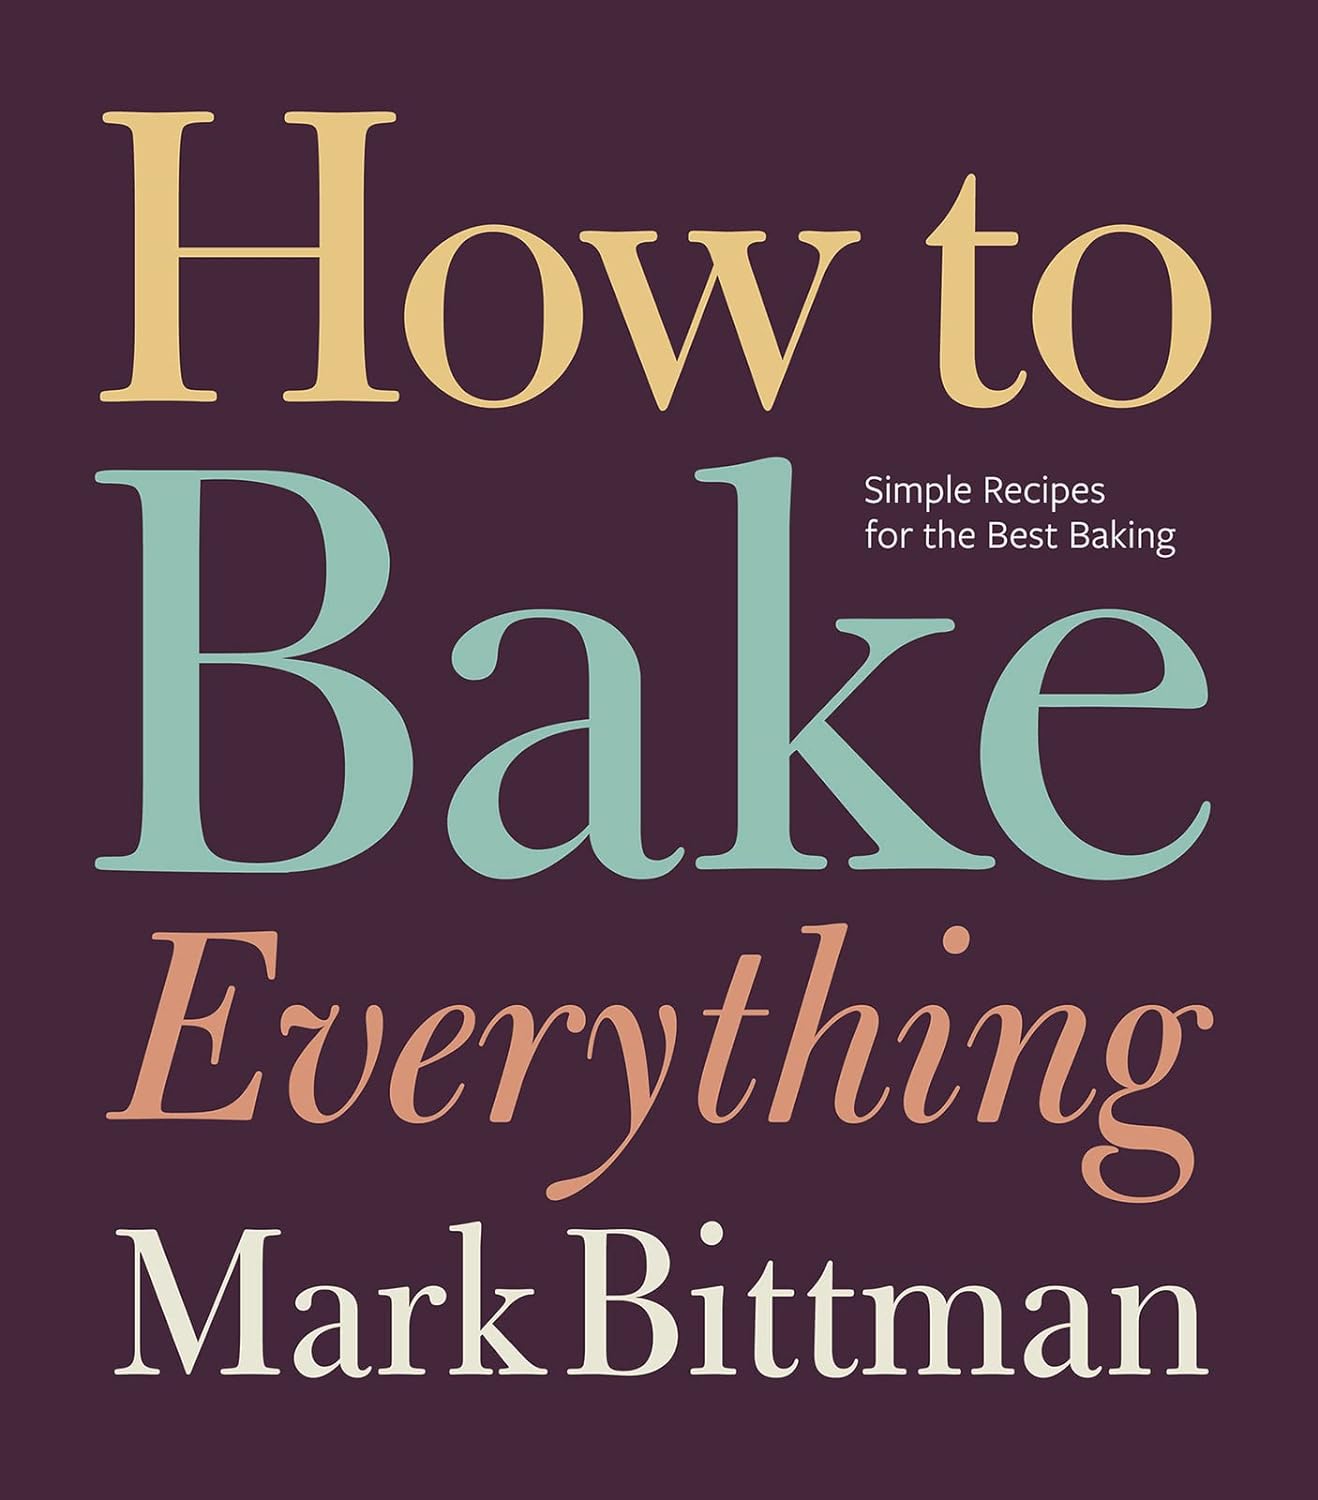 Mark Bittman - How to Bake Everything- Simple Recipes for the Best Baking